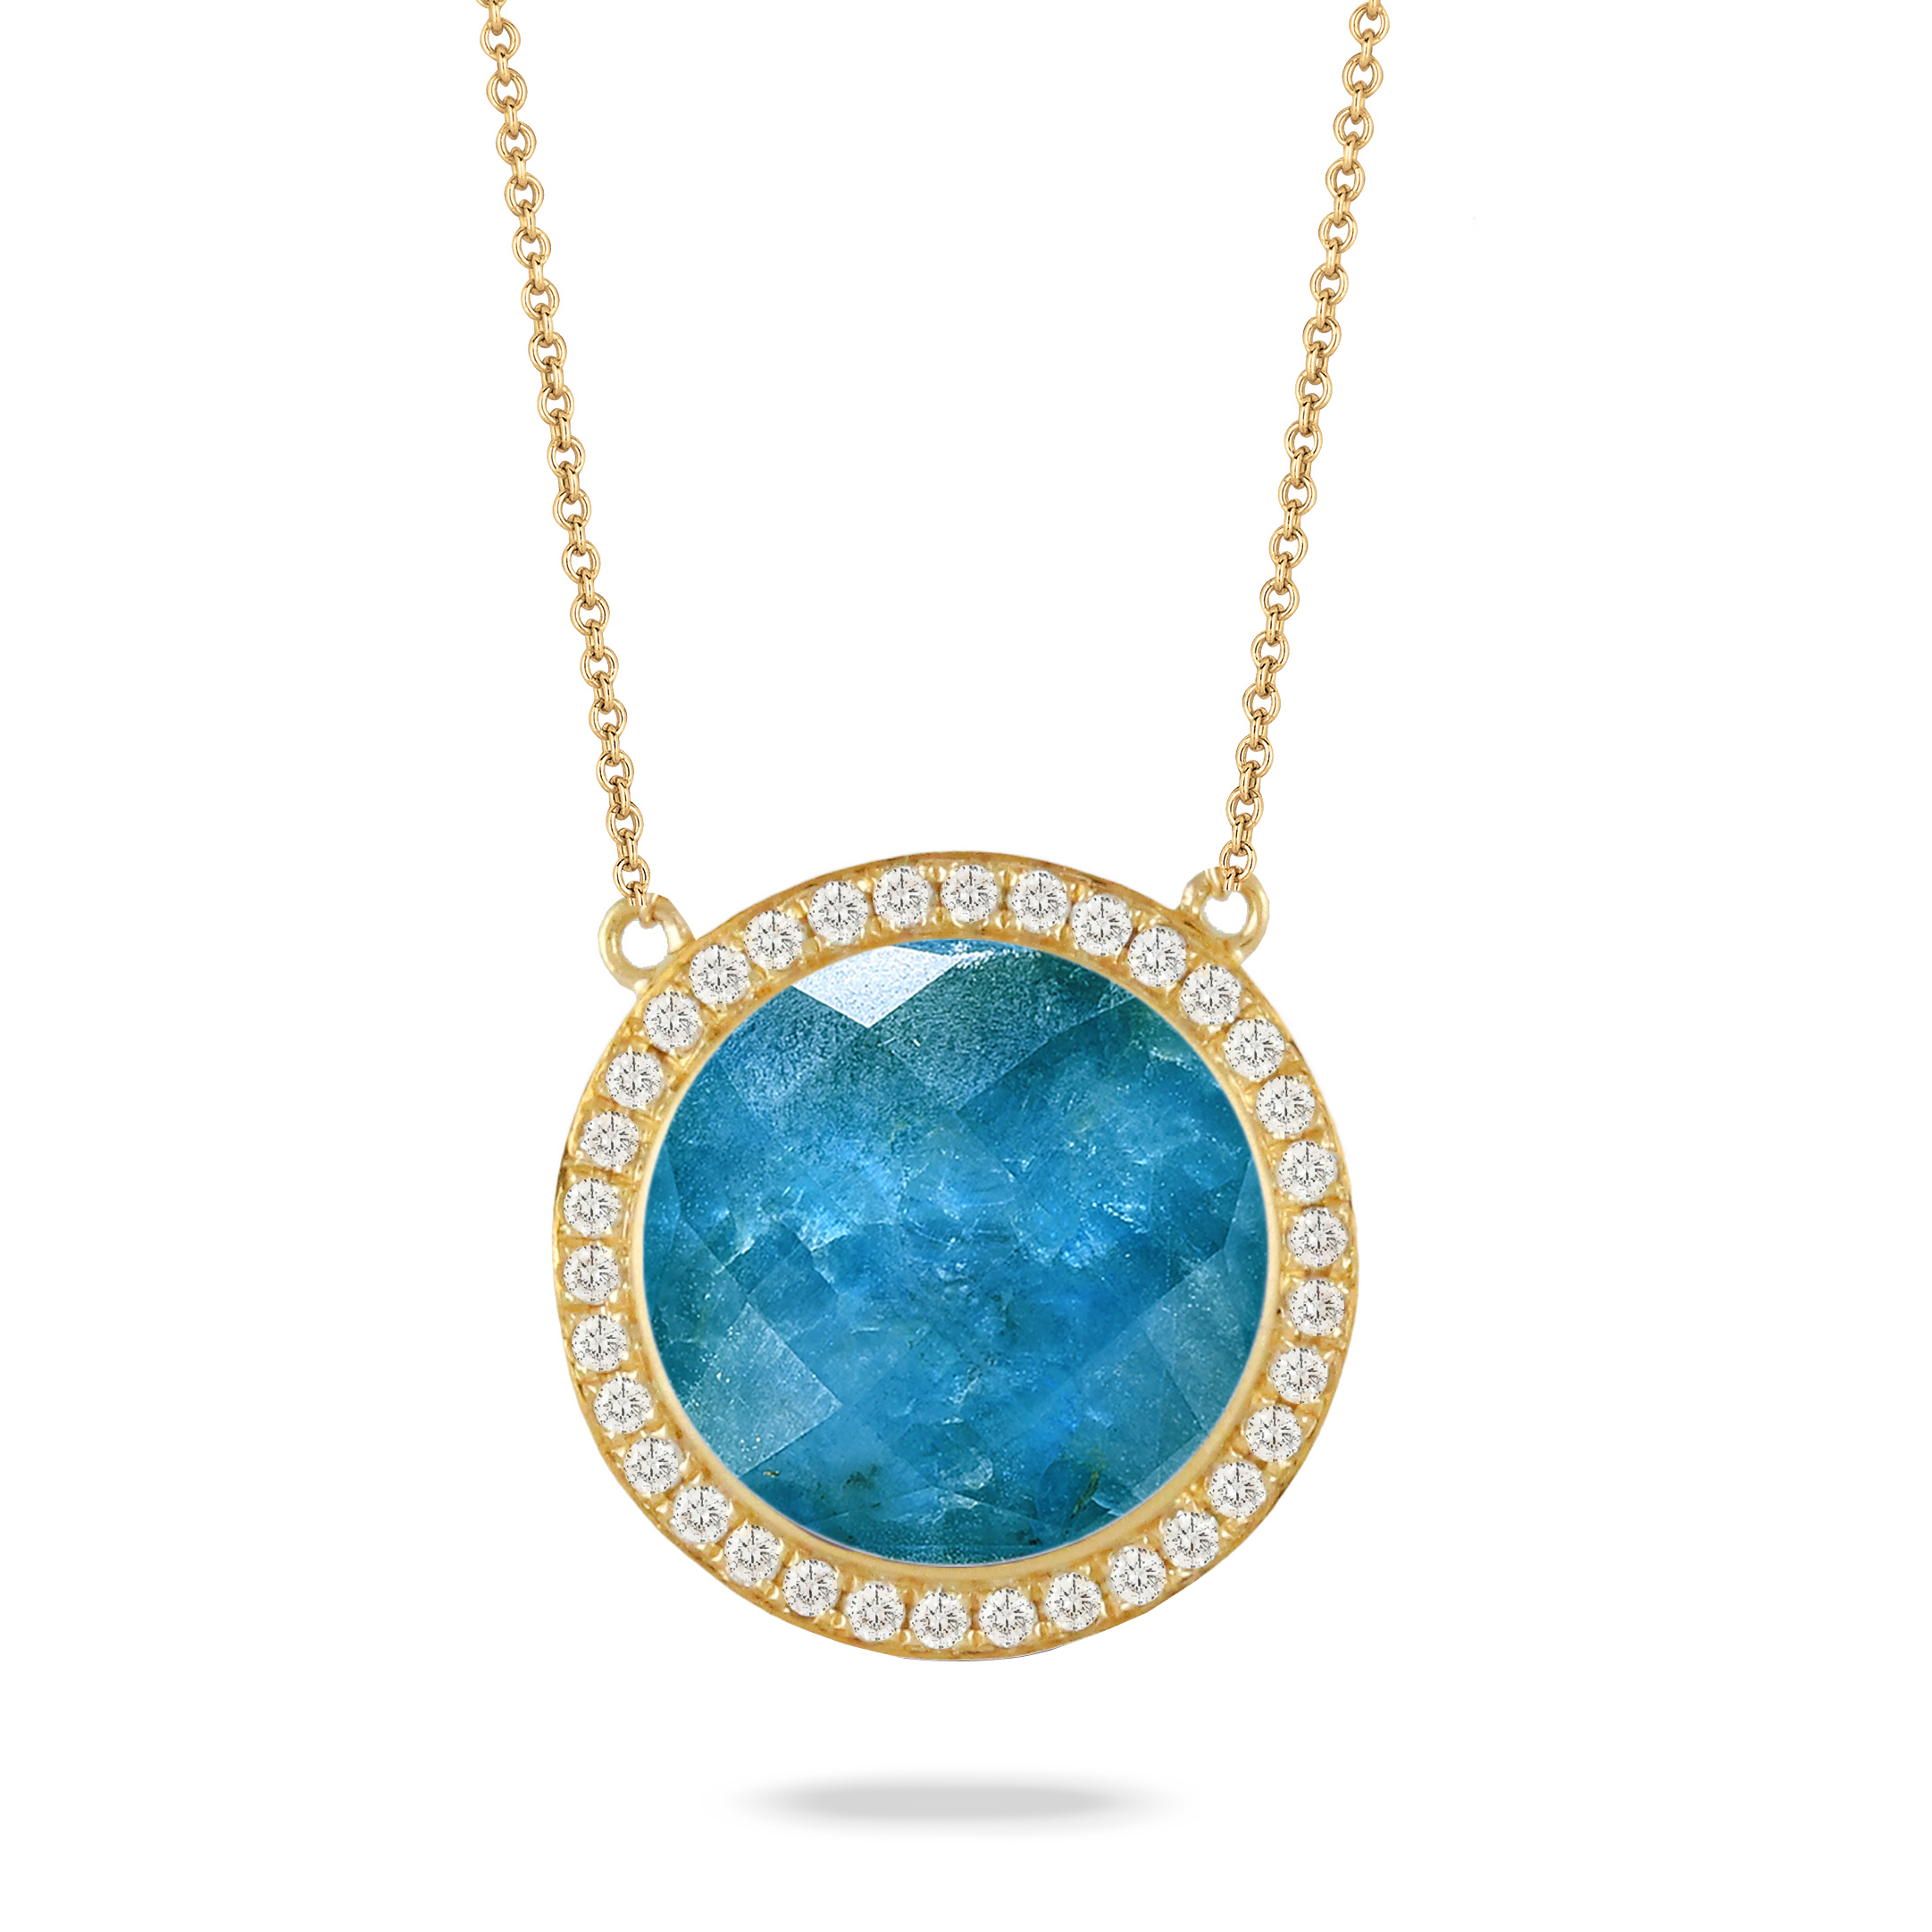 18K Yellow Gold Apatite Necklace - 18K Yellow Gold Diamond Necklace With Clear Quartz Over Appatite In Satin Finish